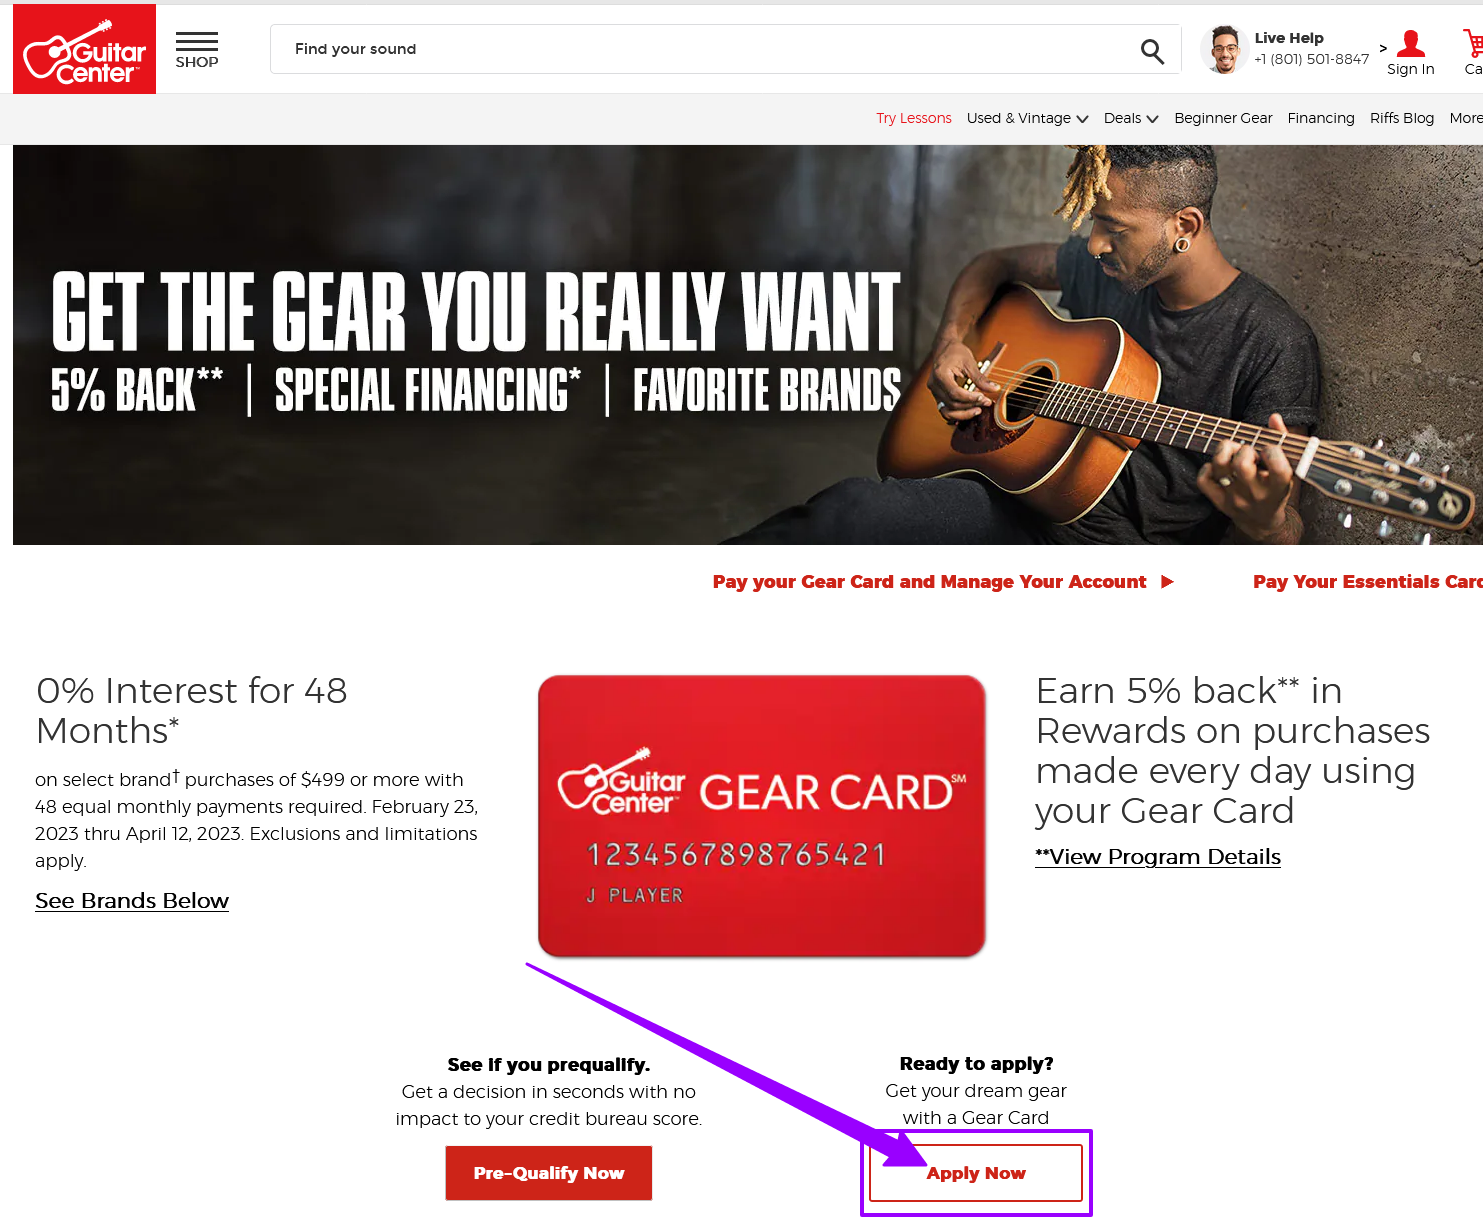 How to Apply for Guitar Center Credit Card